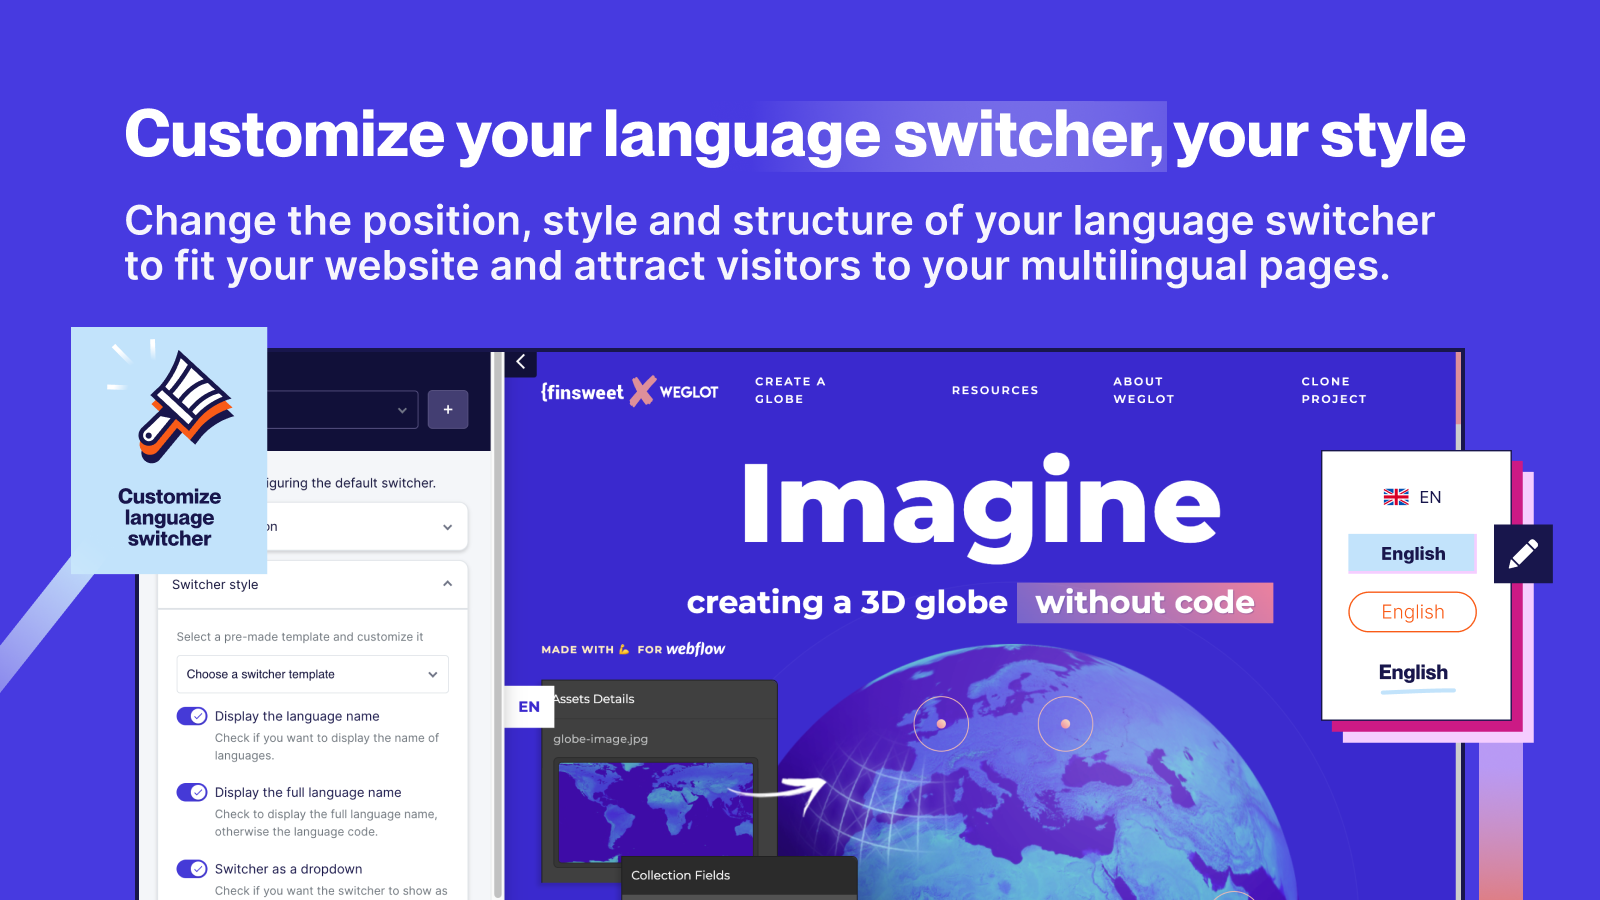 Customize your language switcher to fit your store design